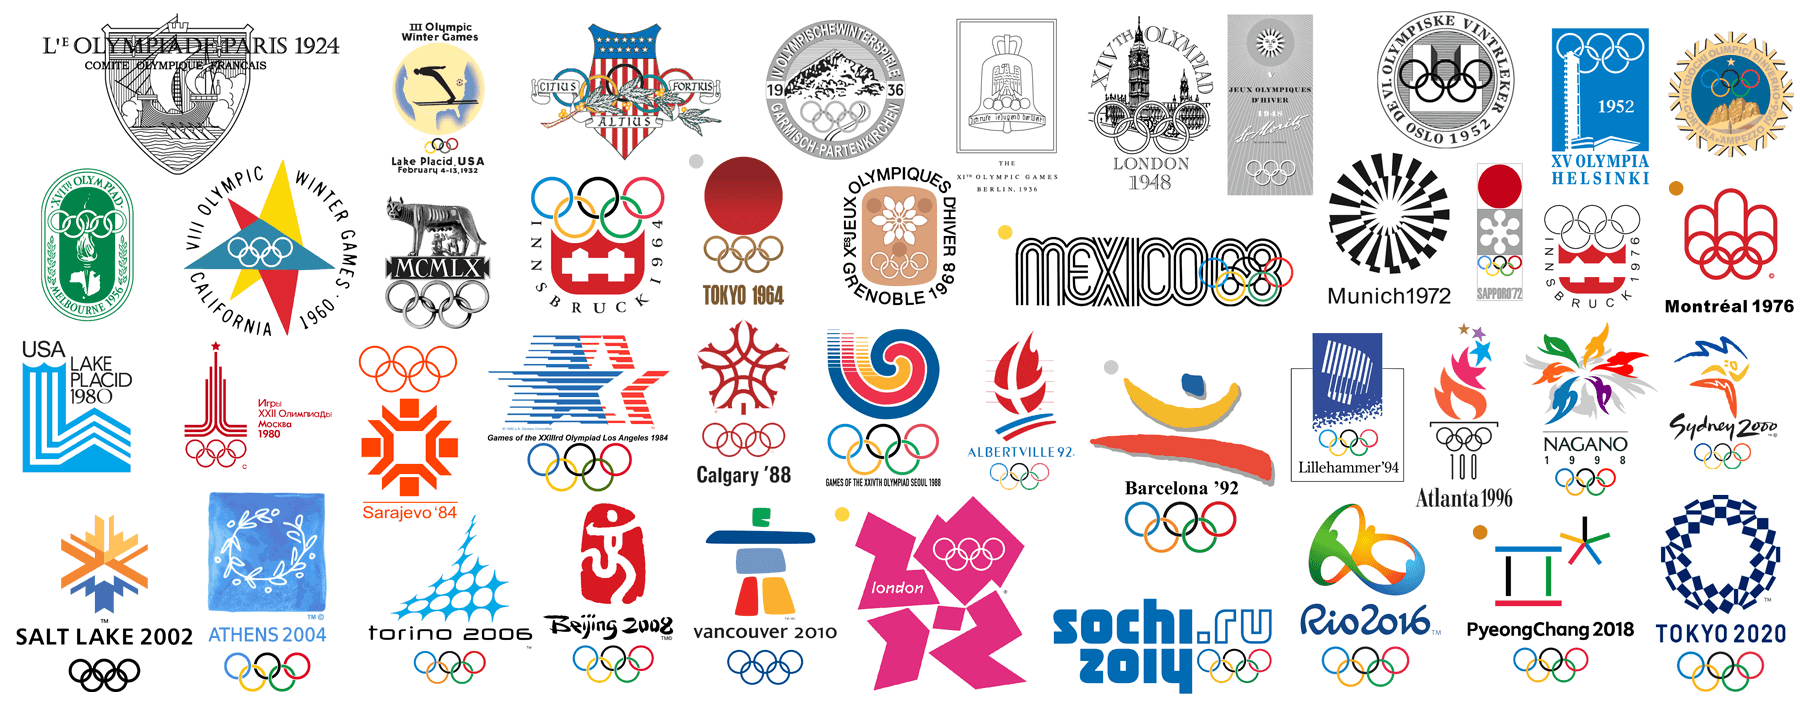 Olimpycs Logo - The best (and worst) Olympic logos in history – Collaboration Room ...